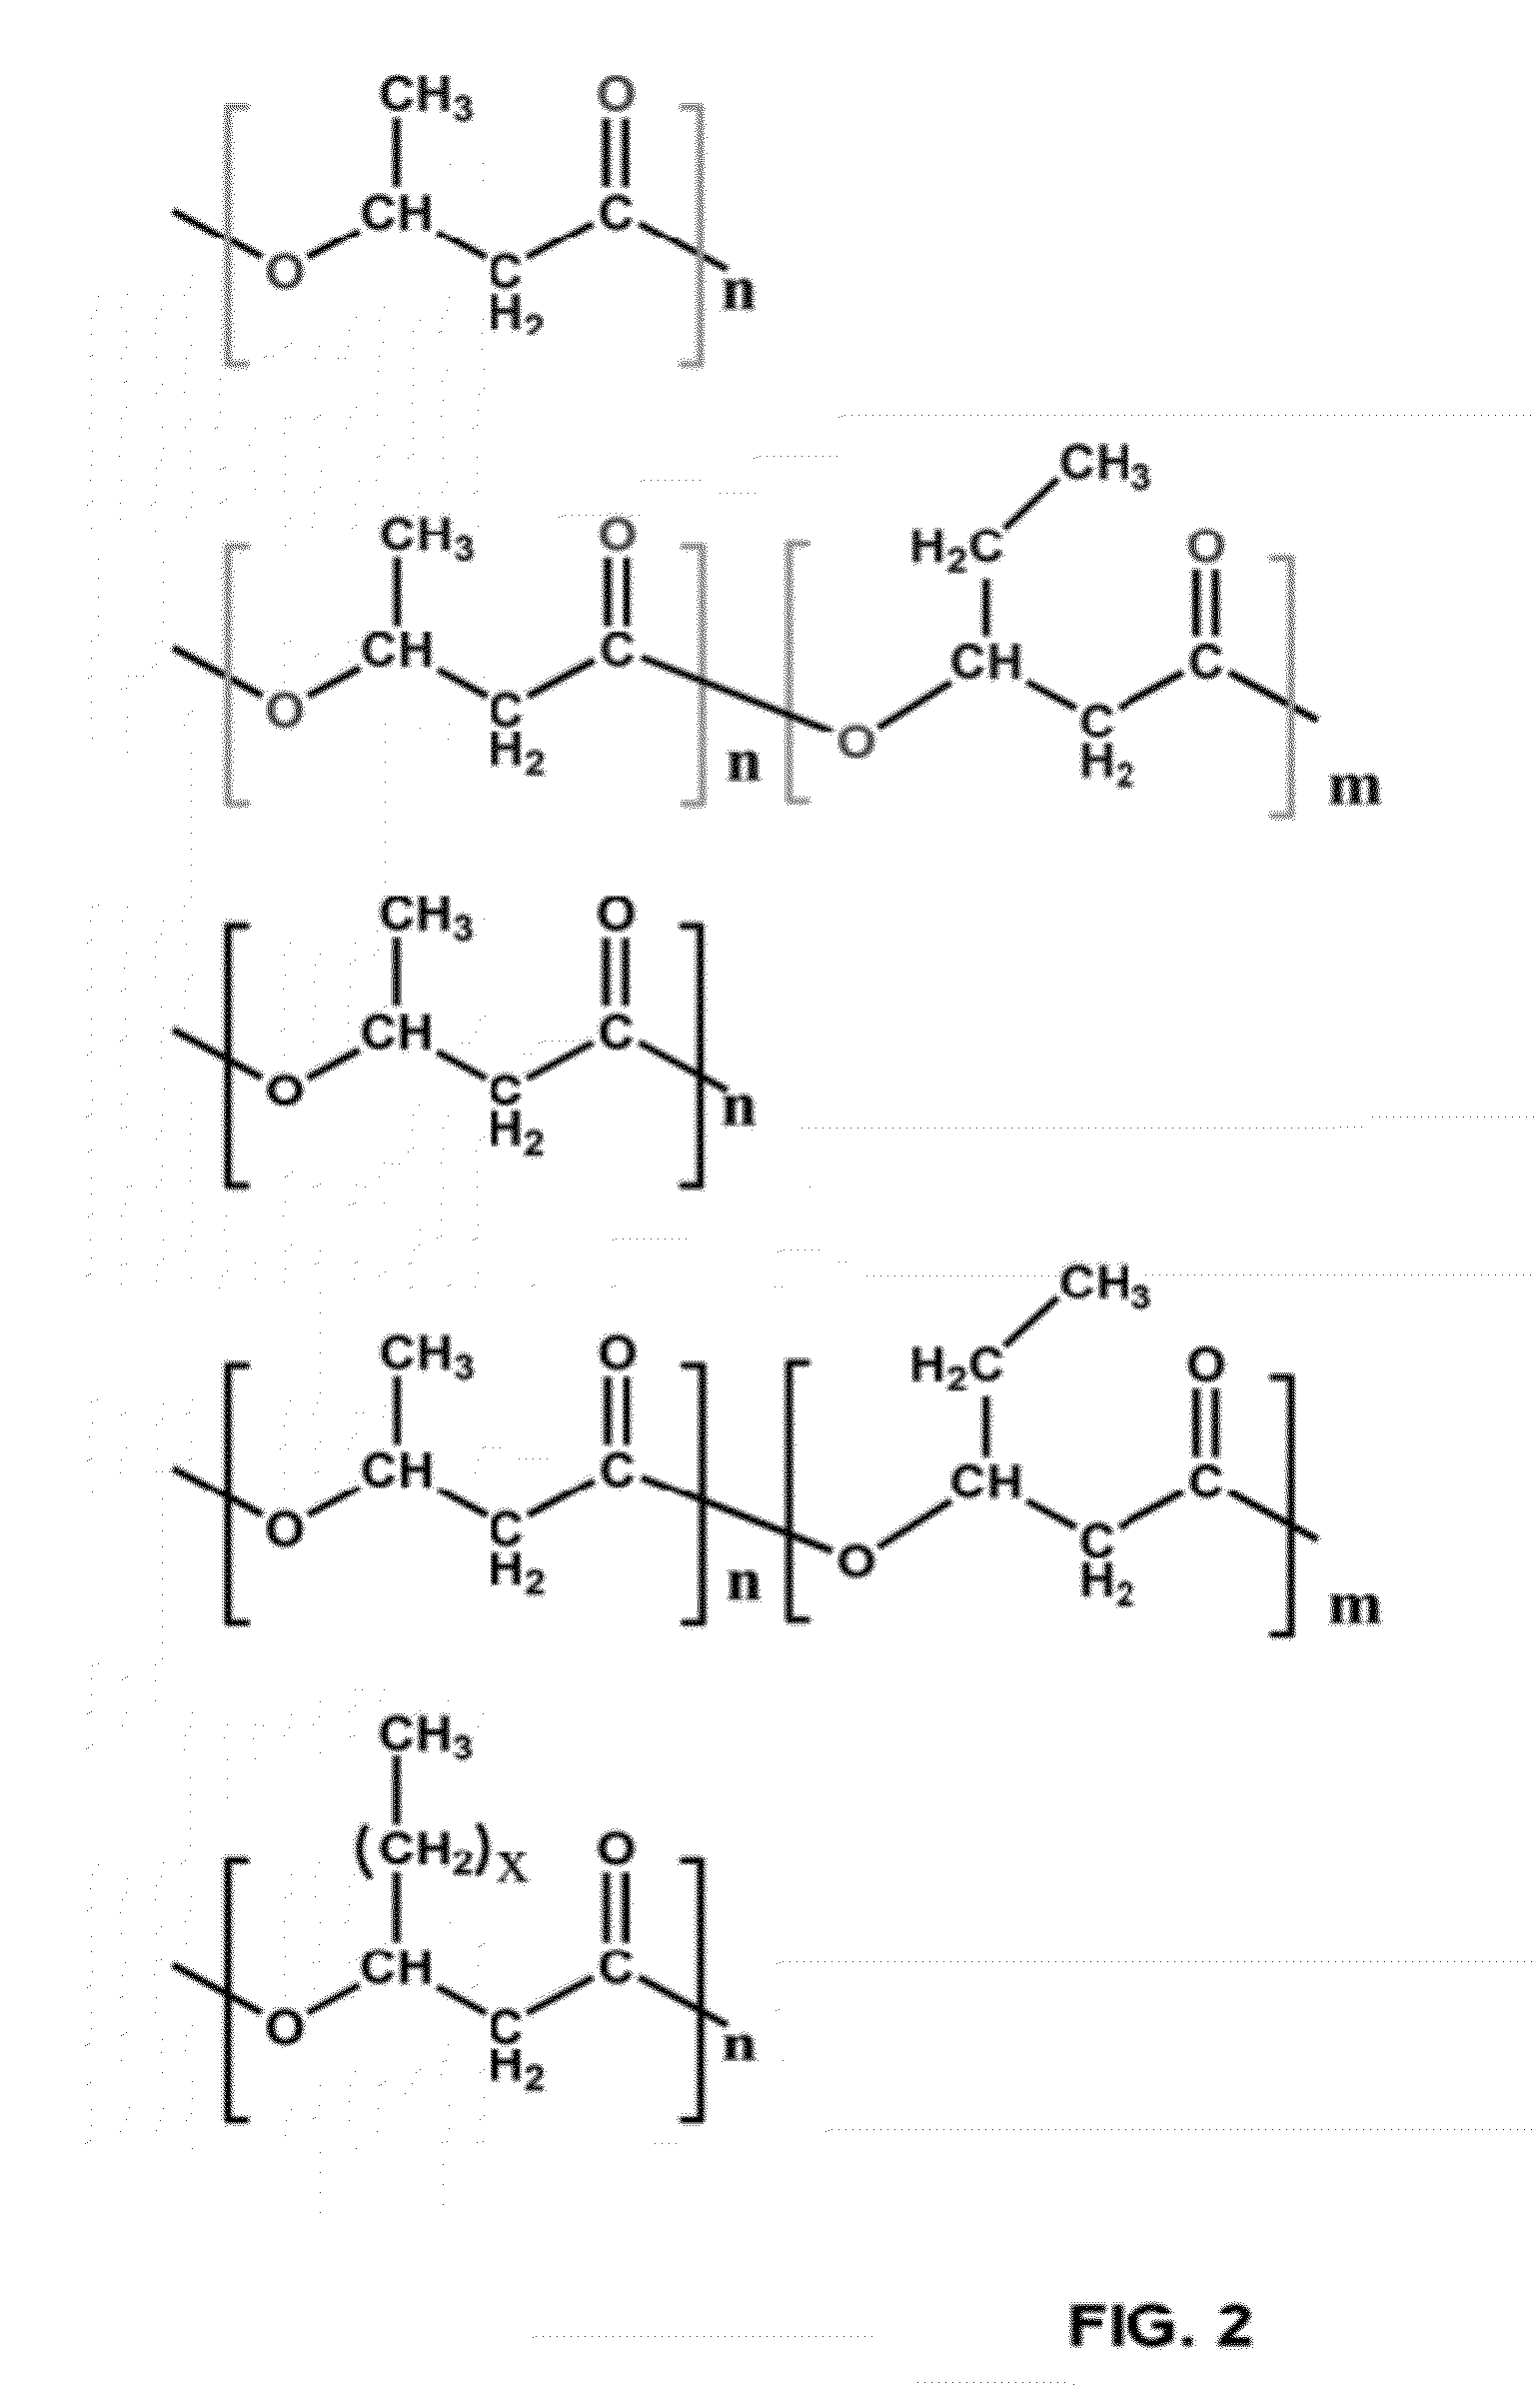 Methods for producing polyhydroxyalkanoates from biodiesel-glycerol